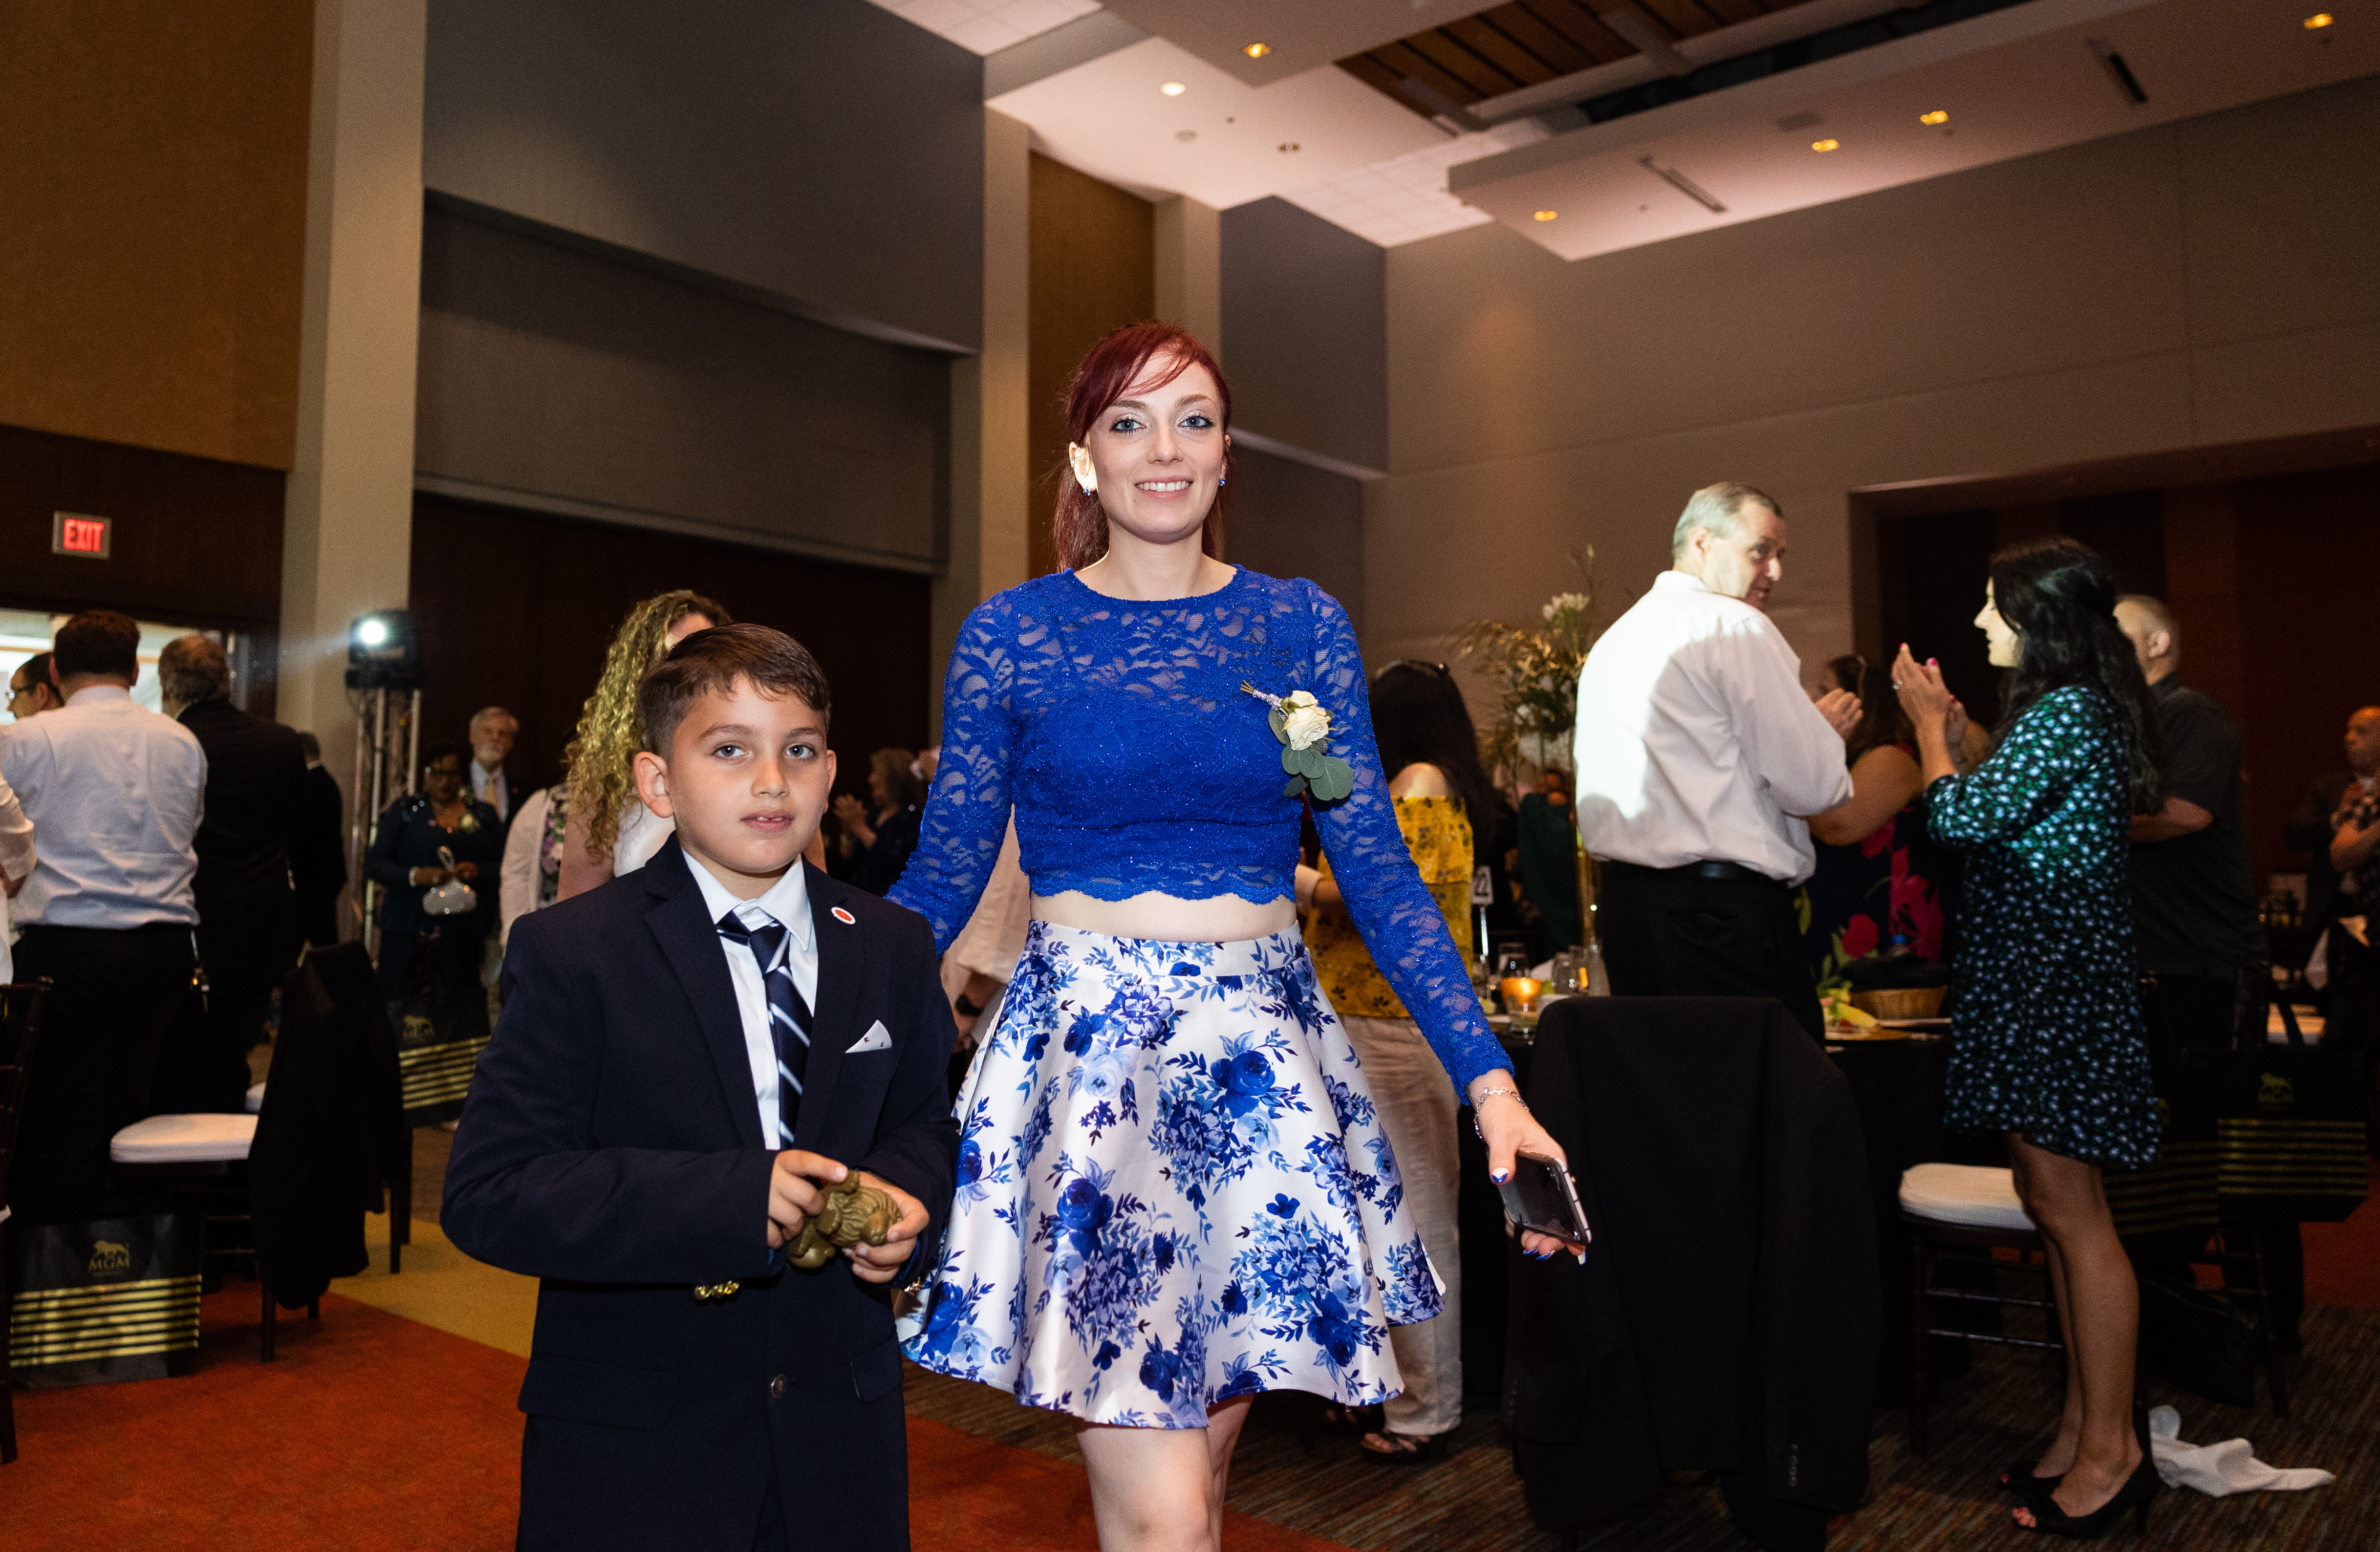 Finalist Felicia Laurin, of Inn on Boltwood, walks to the stage with her son Daniel at the 25th annual Howdy Awards for Hospitality Excellence held at the MassMutual Center Monday evening, May 16, 2022. (Hoang ‘Leon’ Nguyen / The Republican)